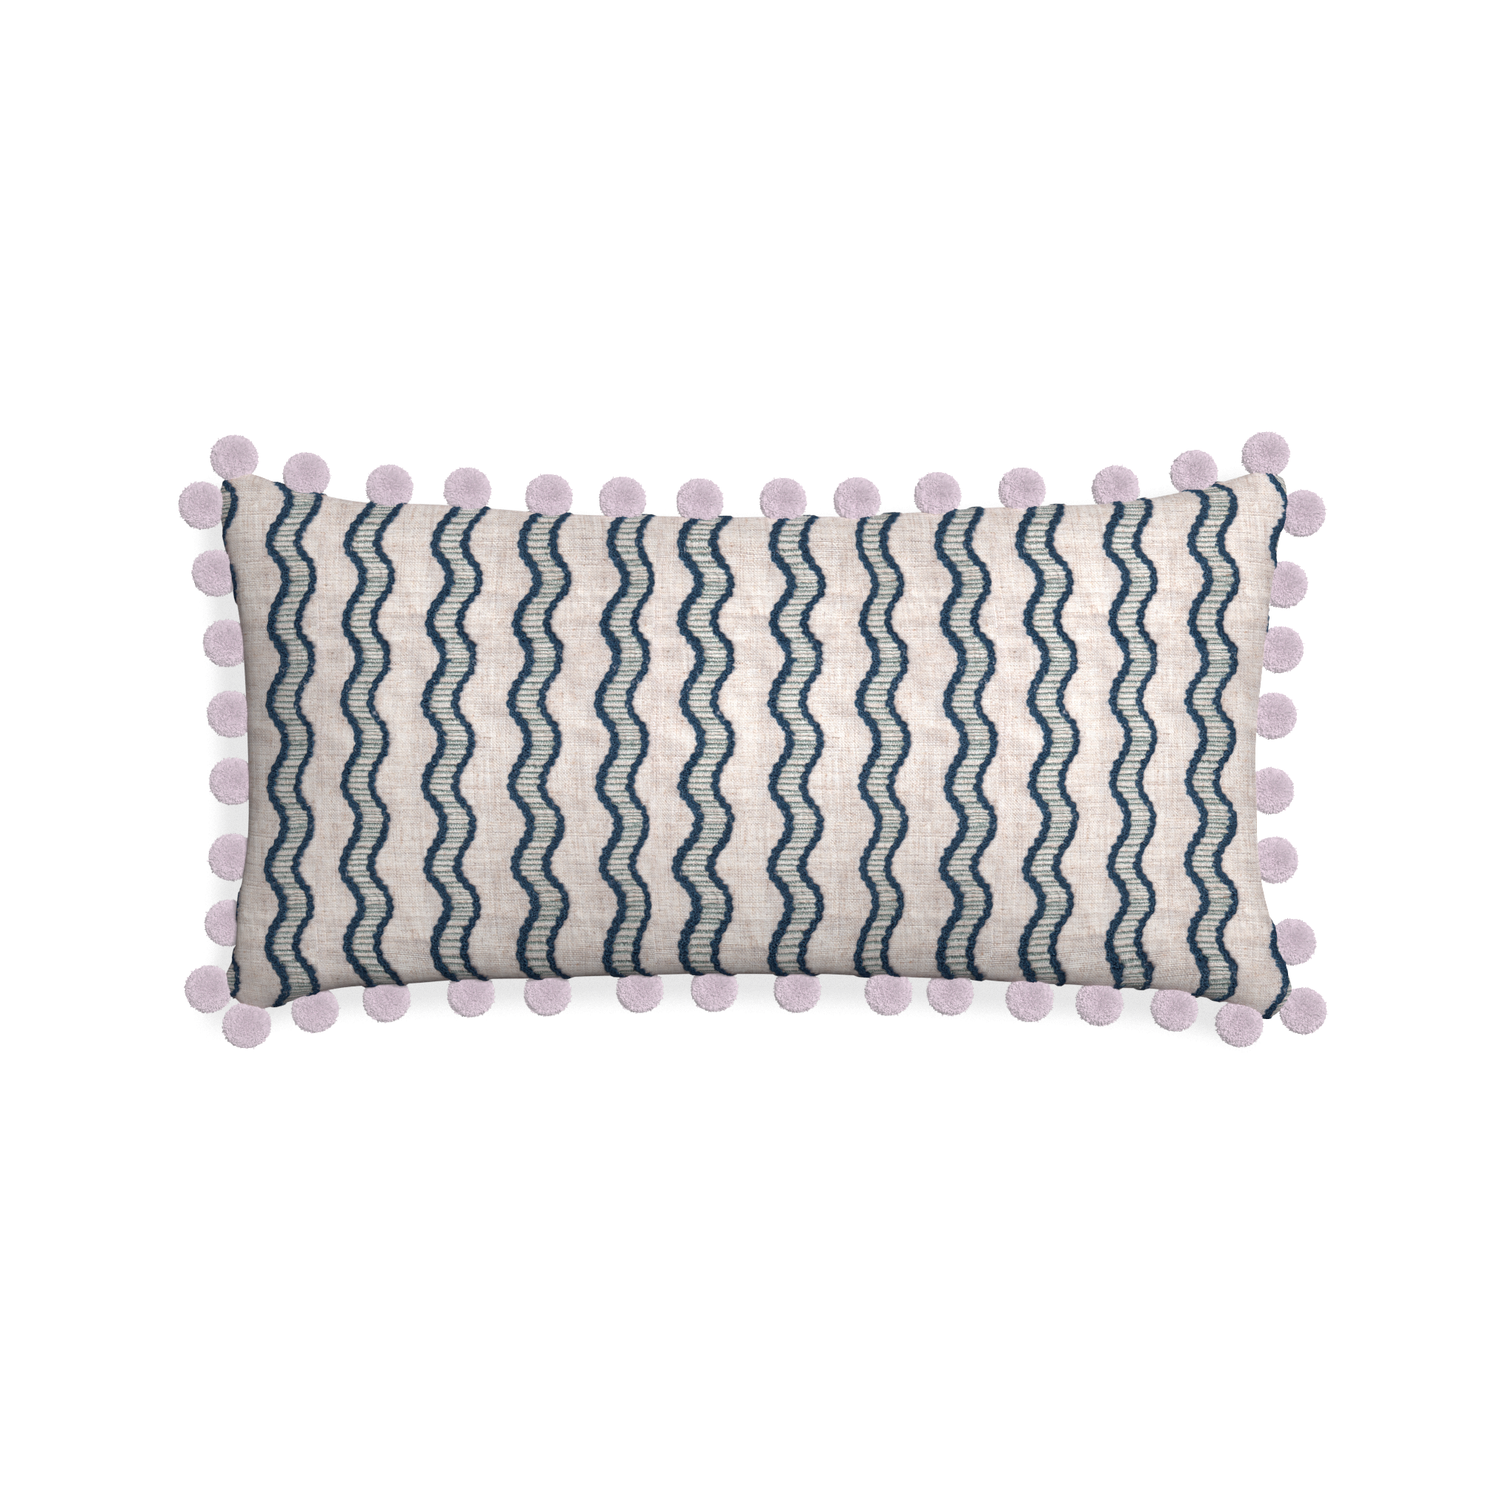 Midi-lumbar beatrice custom embroidered wavepillow with l on white background